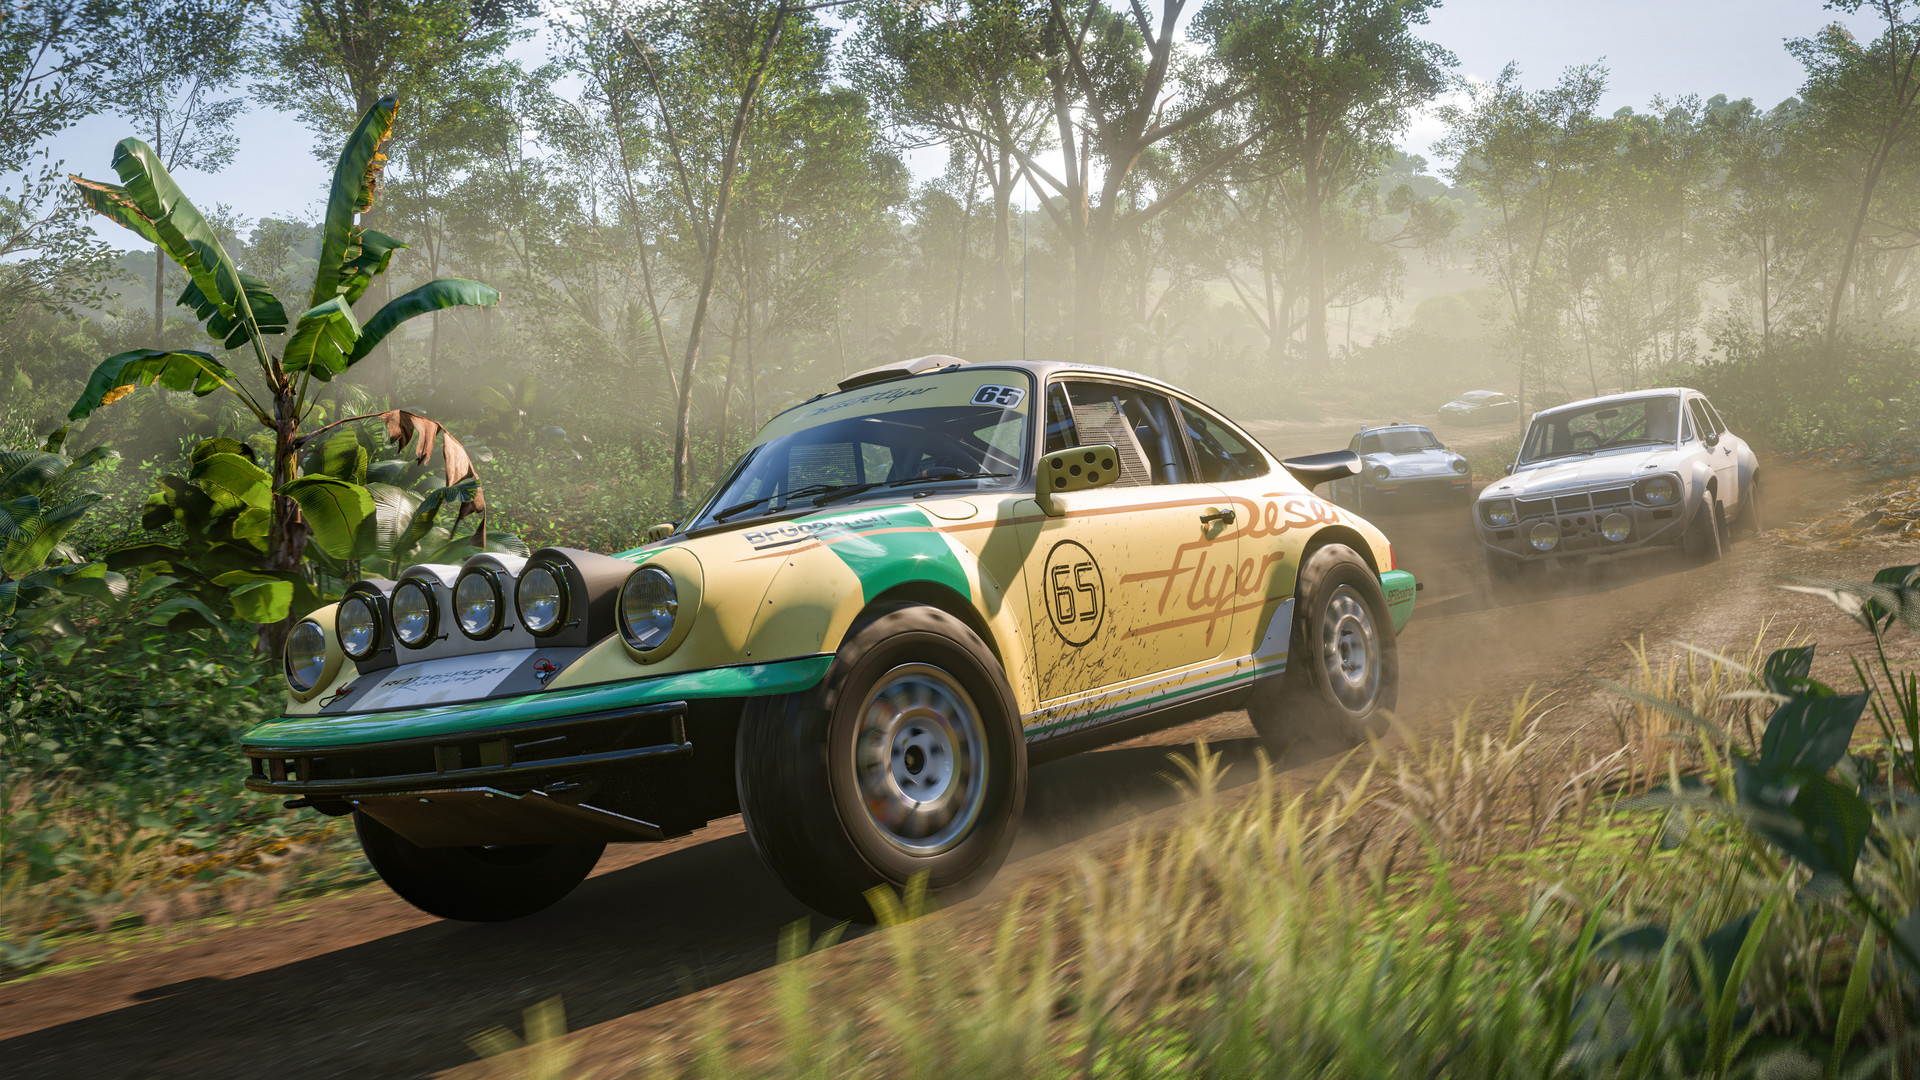 Forza Horizon 5 on PC: System requirements, specs, ray tracing, and more